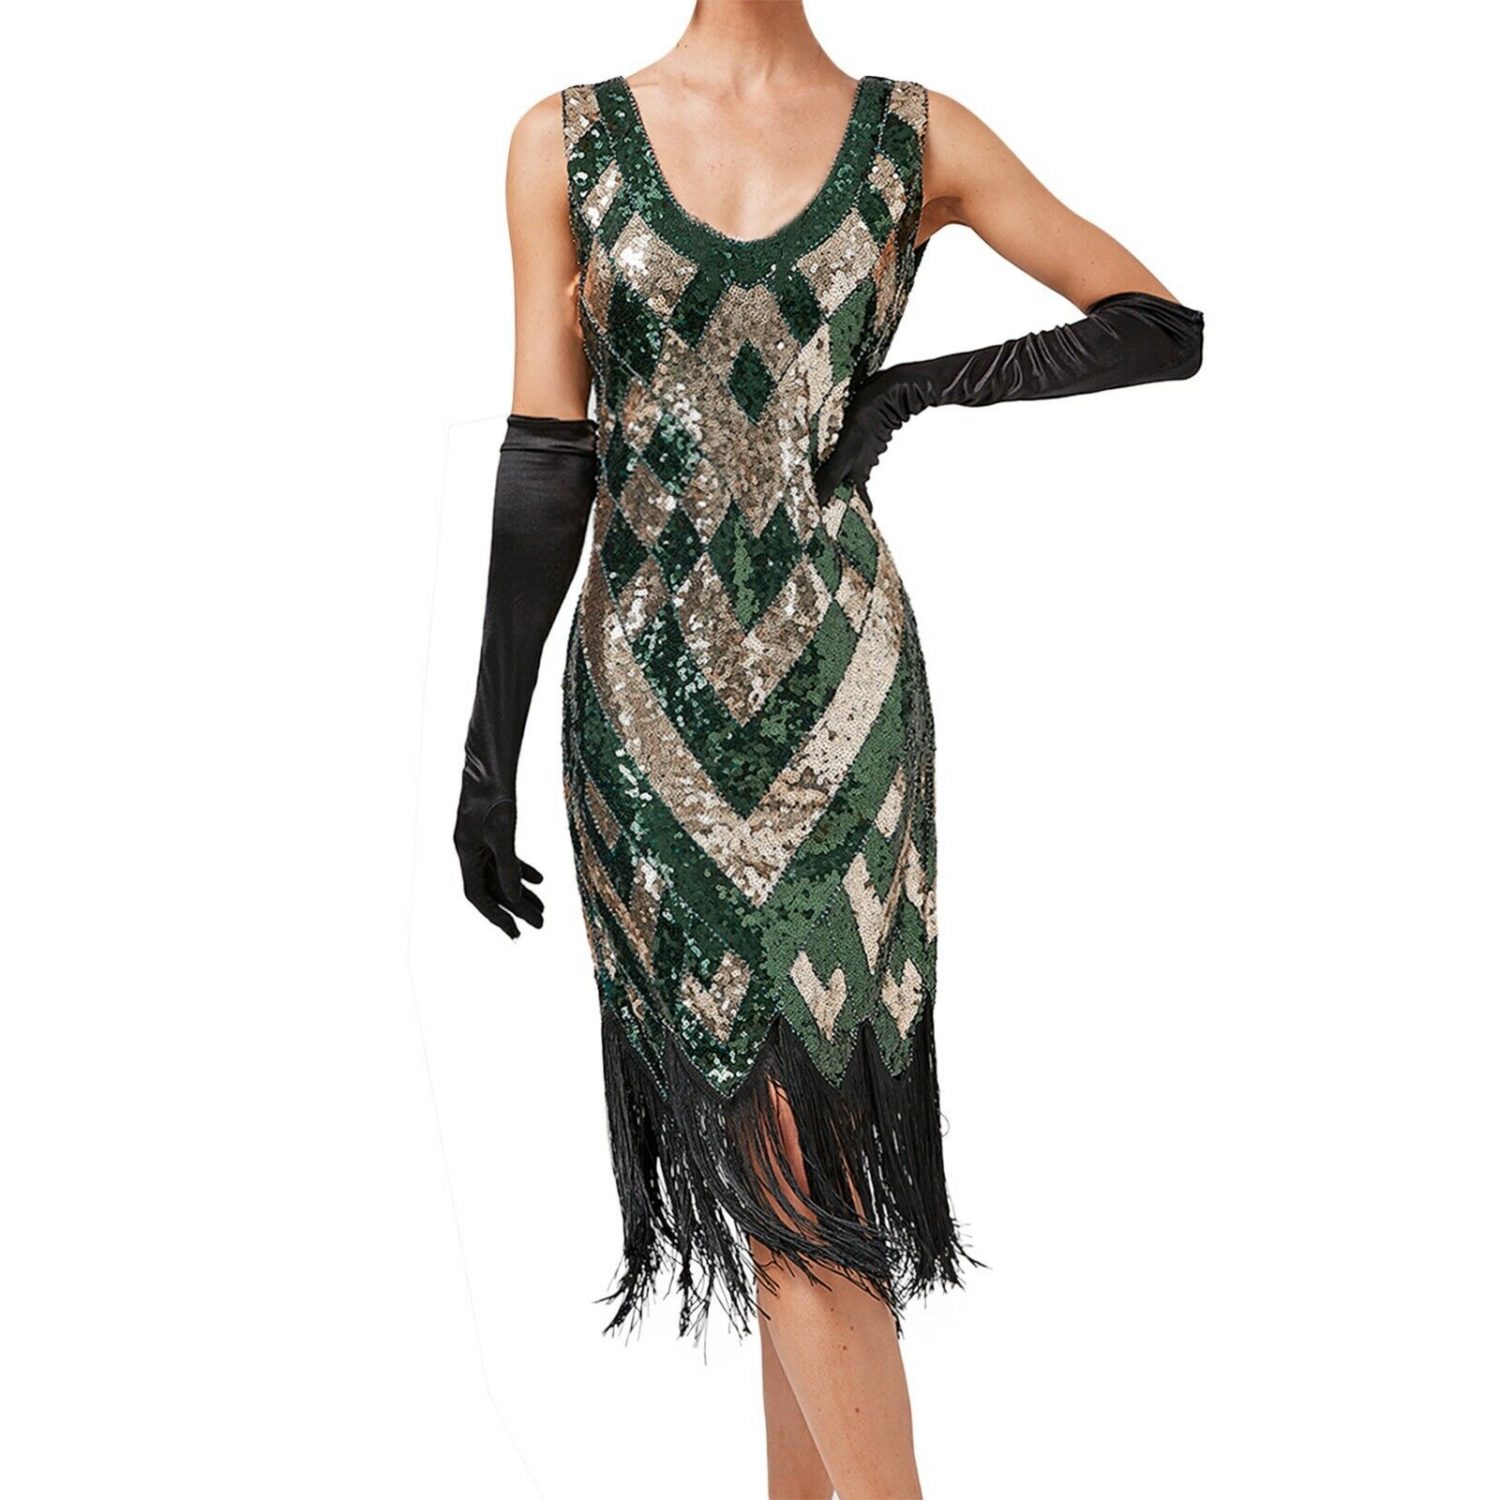 STUNNING GREEN AND GOLD FULLY SEQUINNED ART DECO GATSBY DRESS AVAILABLE ...